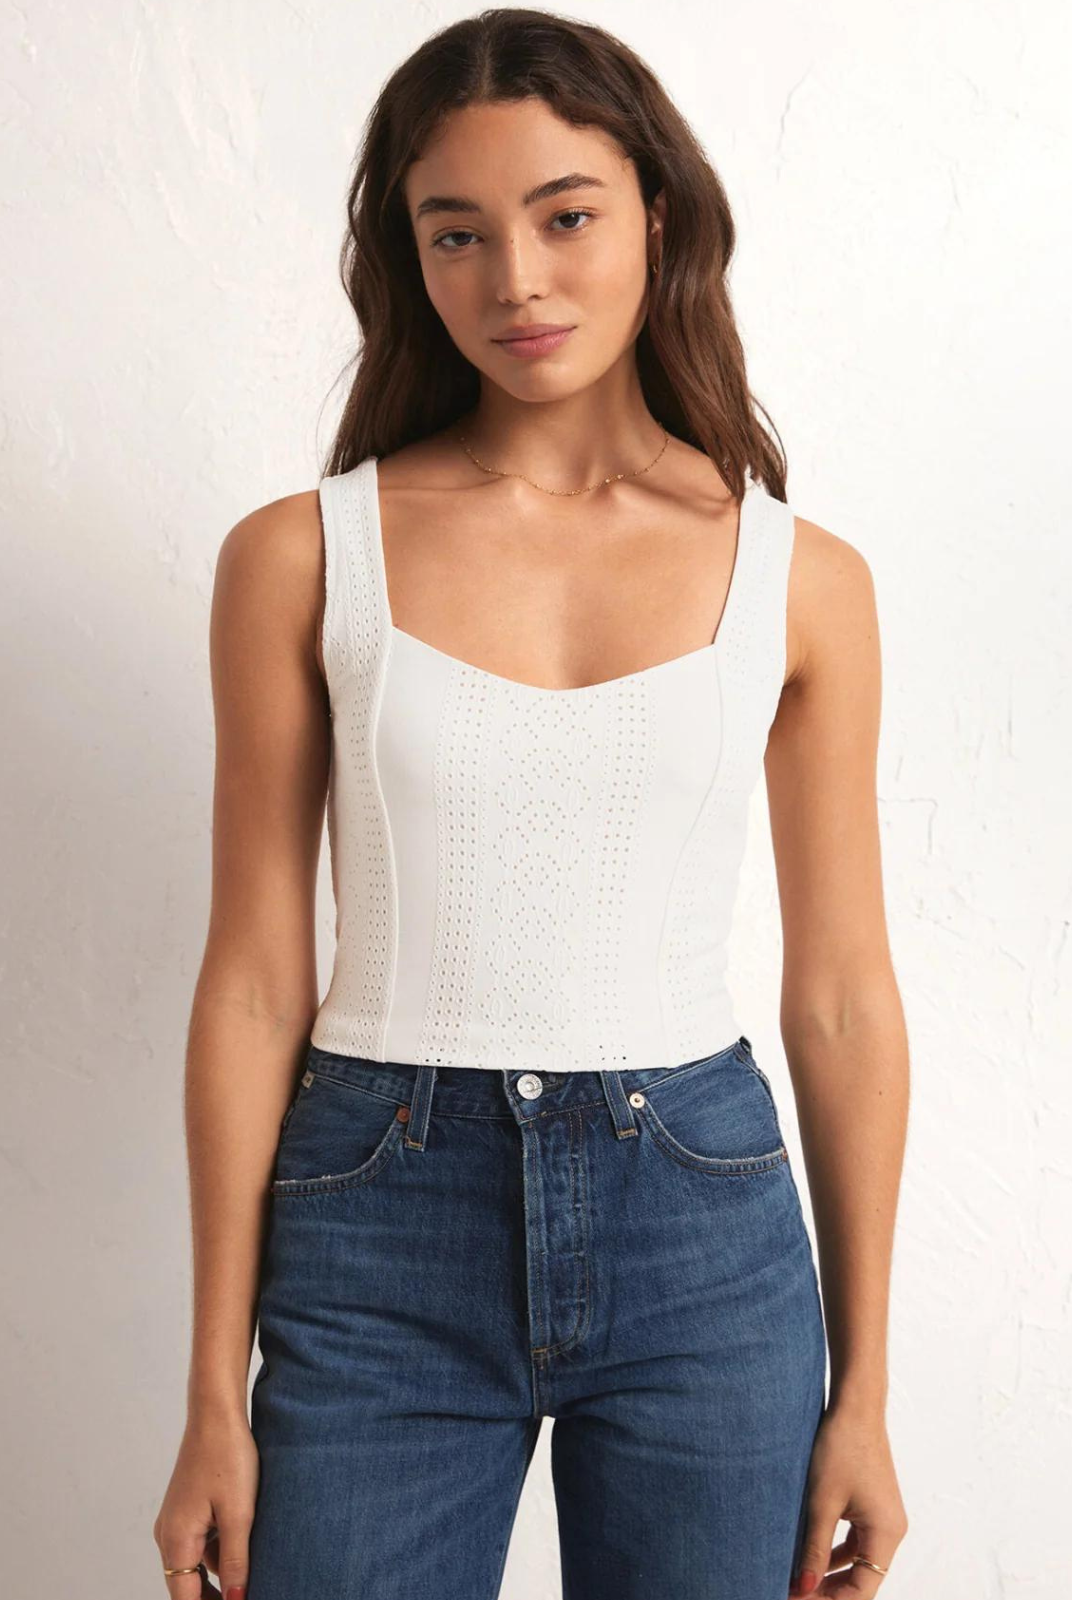 Z Supply Zaria Knit Eyelet Top.An everyday basic with a twist! The Zaria Top features a stunning white eyelet fabric, thick knit straps and a slightly cropped hem. Perfect for all of our bridal babes out there!